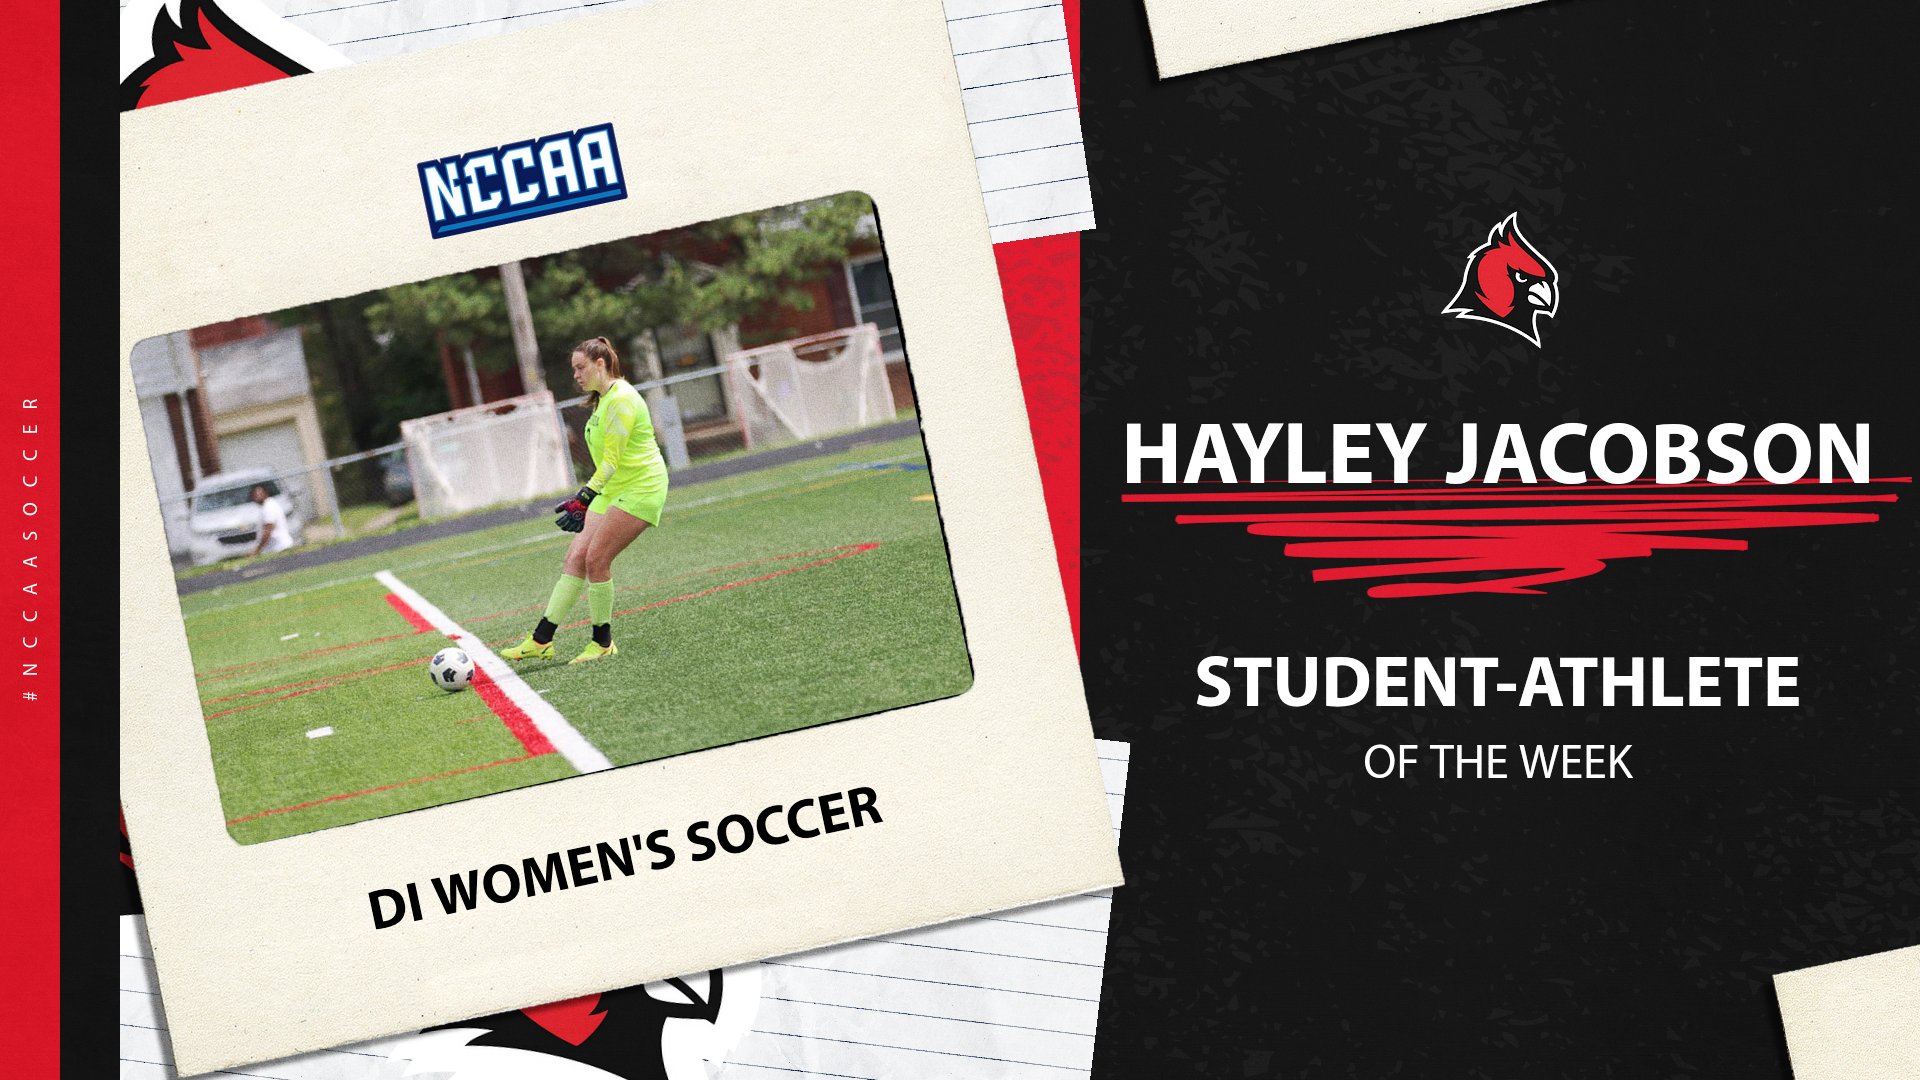 Hayley Jacobson wins second NCCAA Defensive Player of the Week